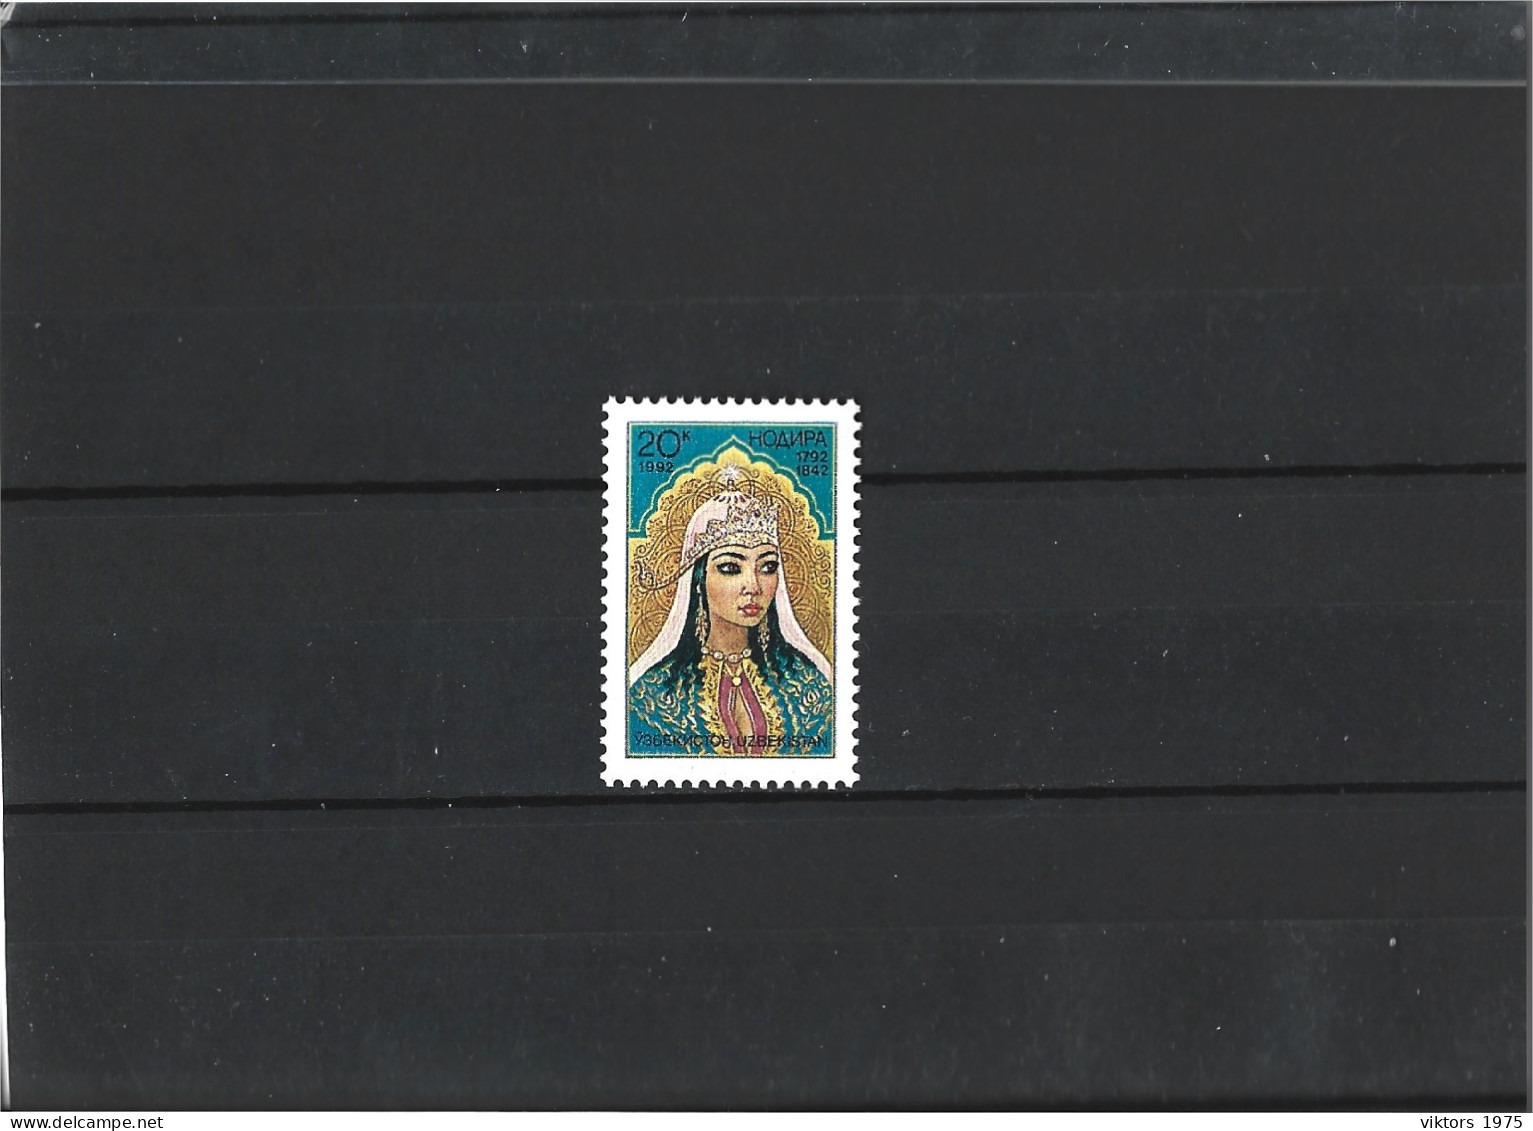 MNH Stamp Nr.1 In MICHEL Catalog - Ouzbékistan